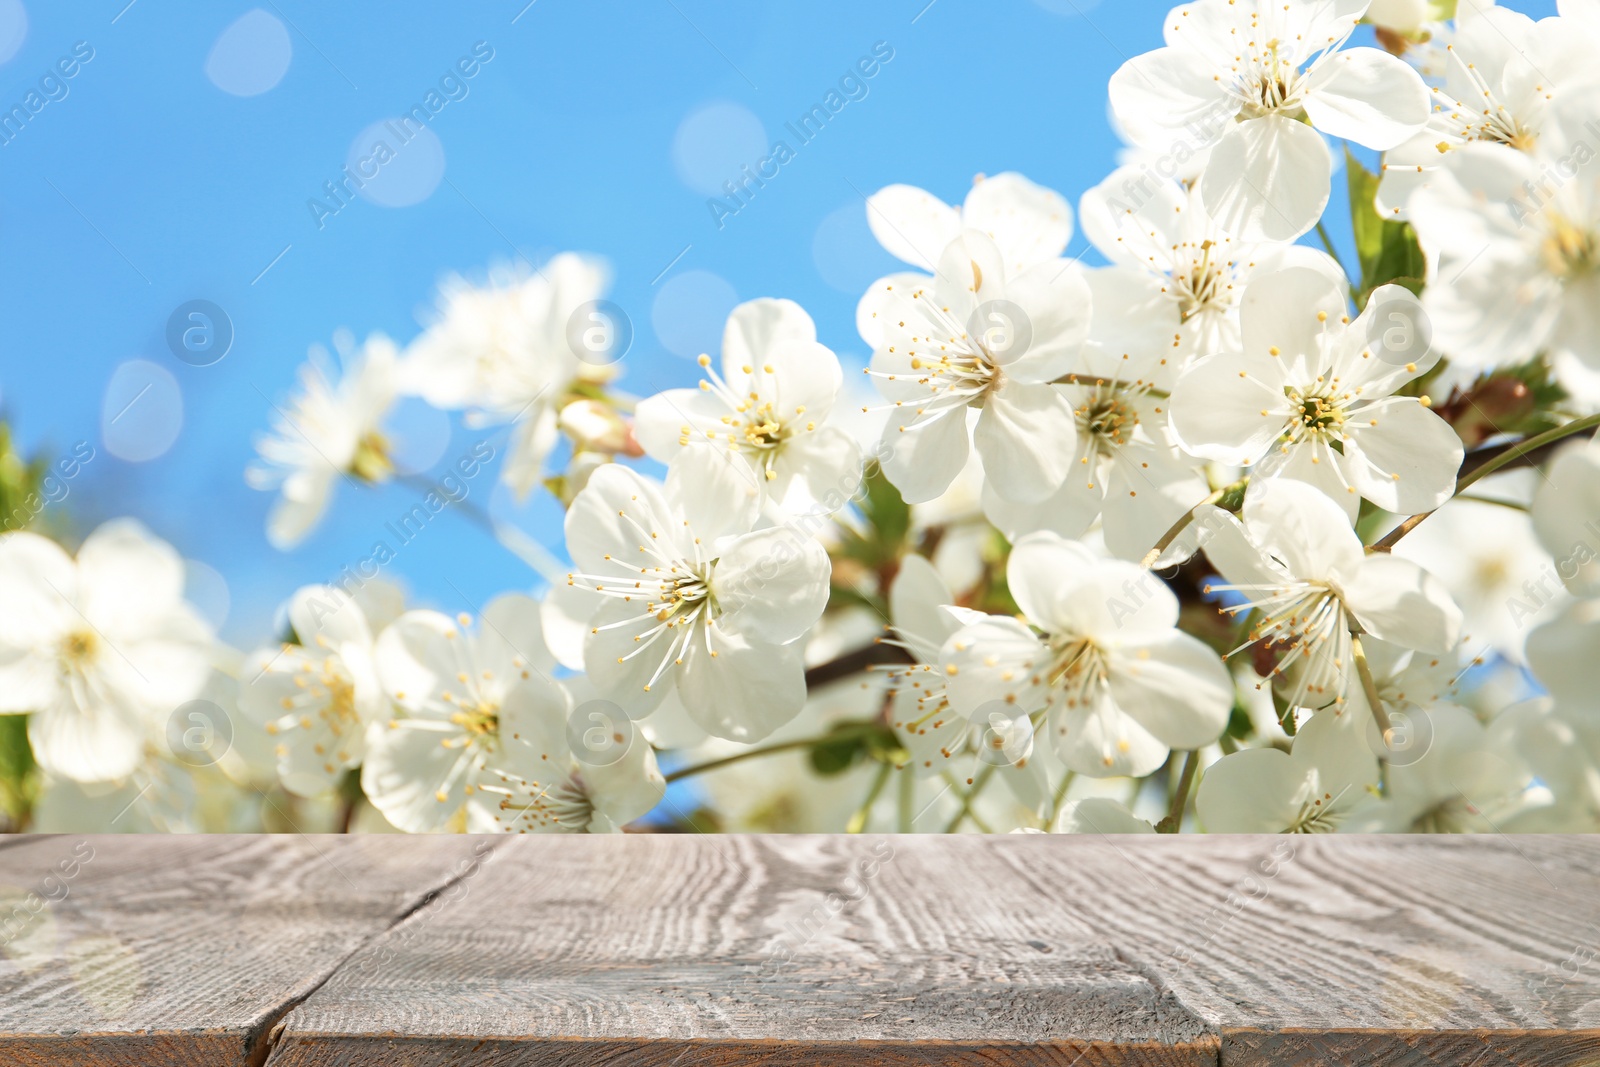 Image of Wooden table and beautiful cherry tree. Springtime